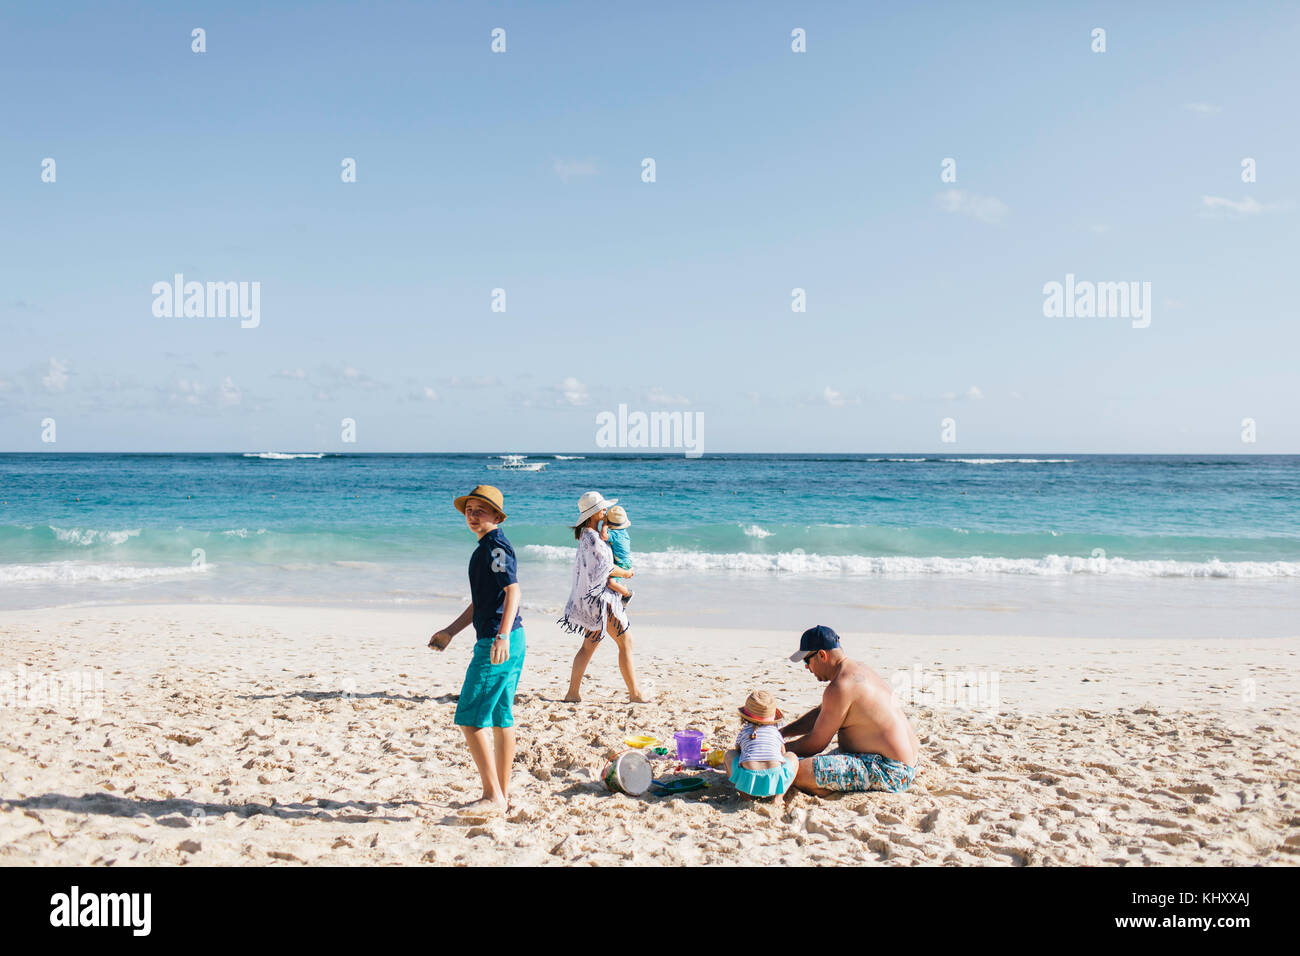 Family on beach together Stock Photo